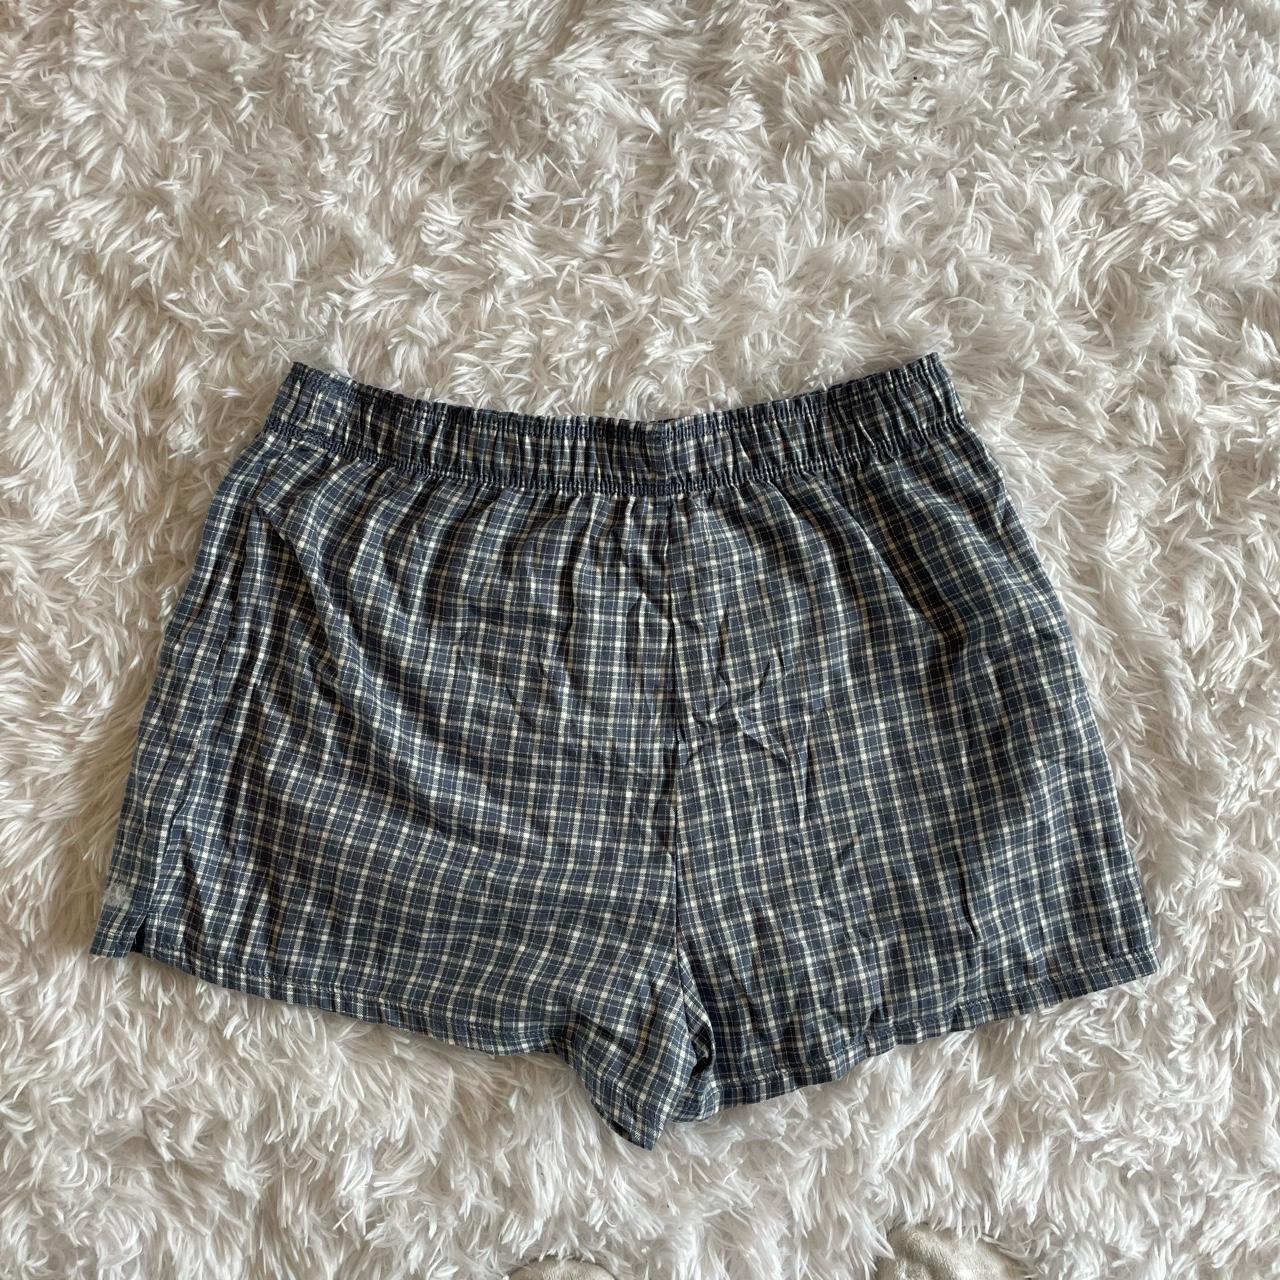 Target Women's Blue and White Shorts (3)